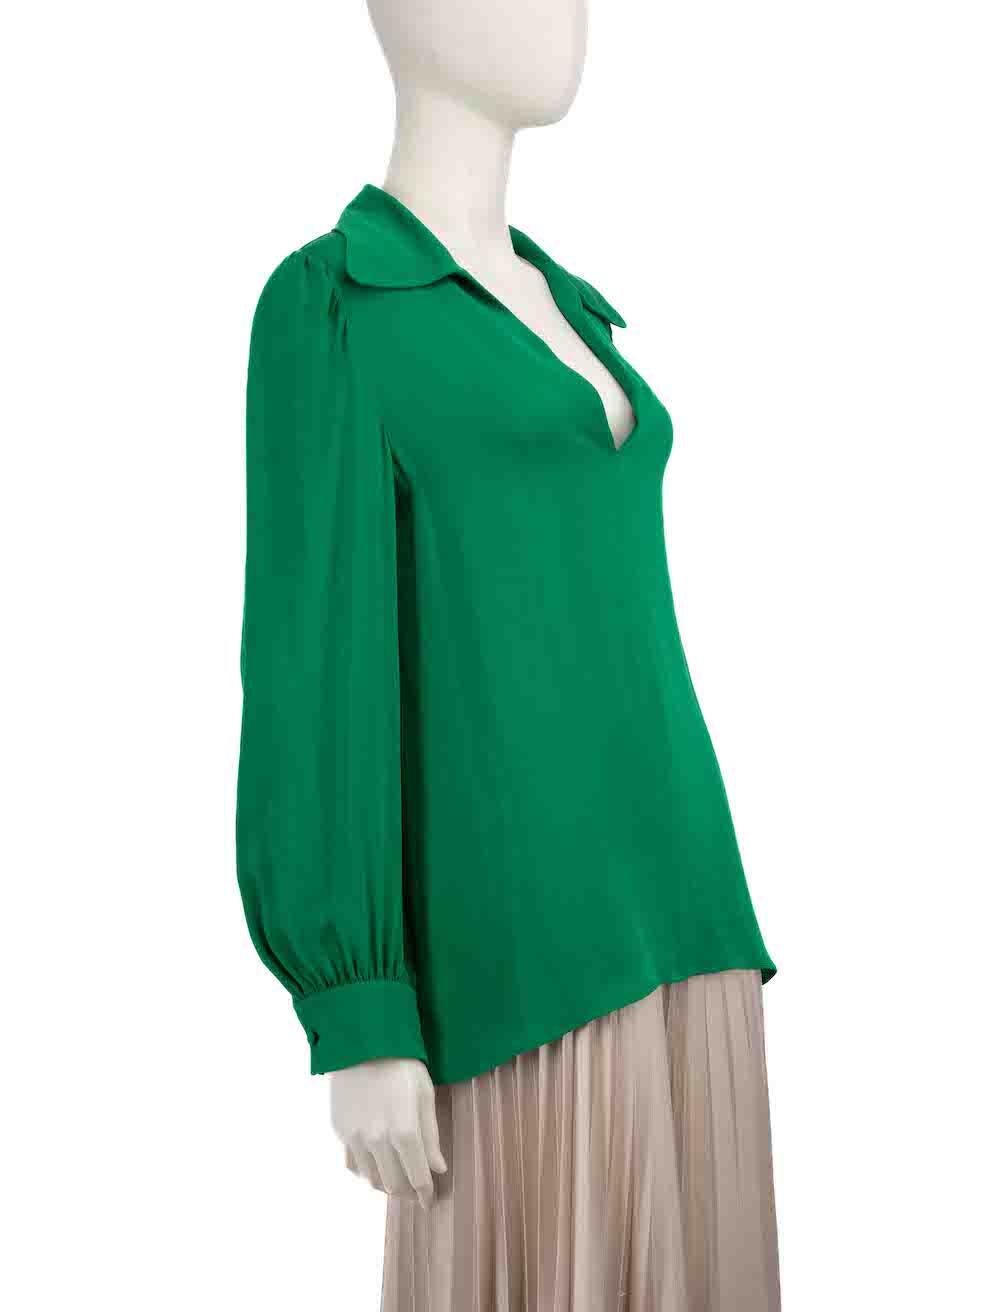 CONDITION is Very good. Minimal wear to shirt is evident. The size and care label has been removed on this used Valentino designer resale item.
 
 
 
 Details
 
 
 Green
 
 Silk
 
 Blouse
 
 Long sleeves
 
 Buttoned cuffs
 
 Neck tie detail
 
 
 
 
